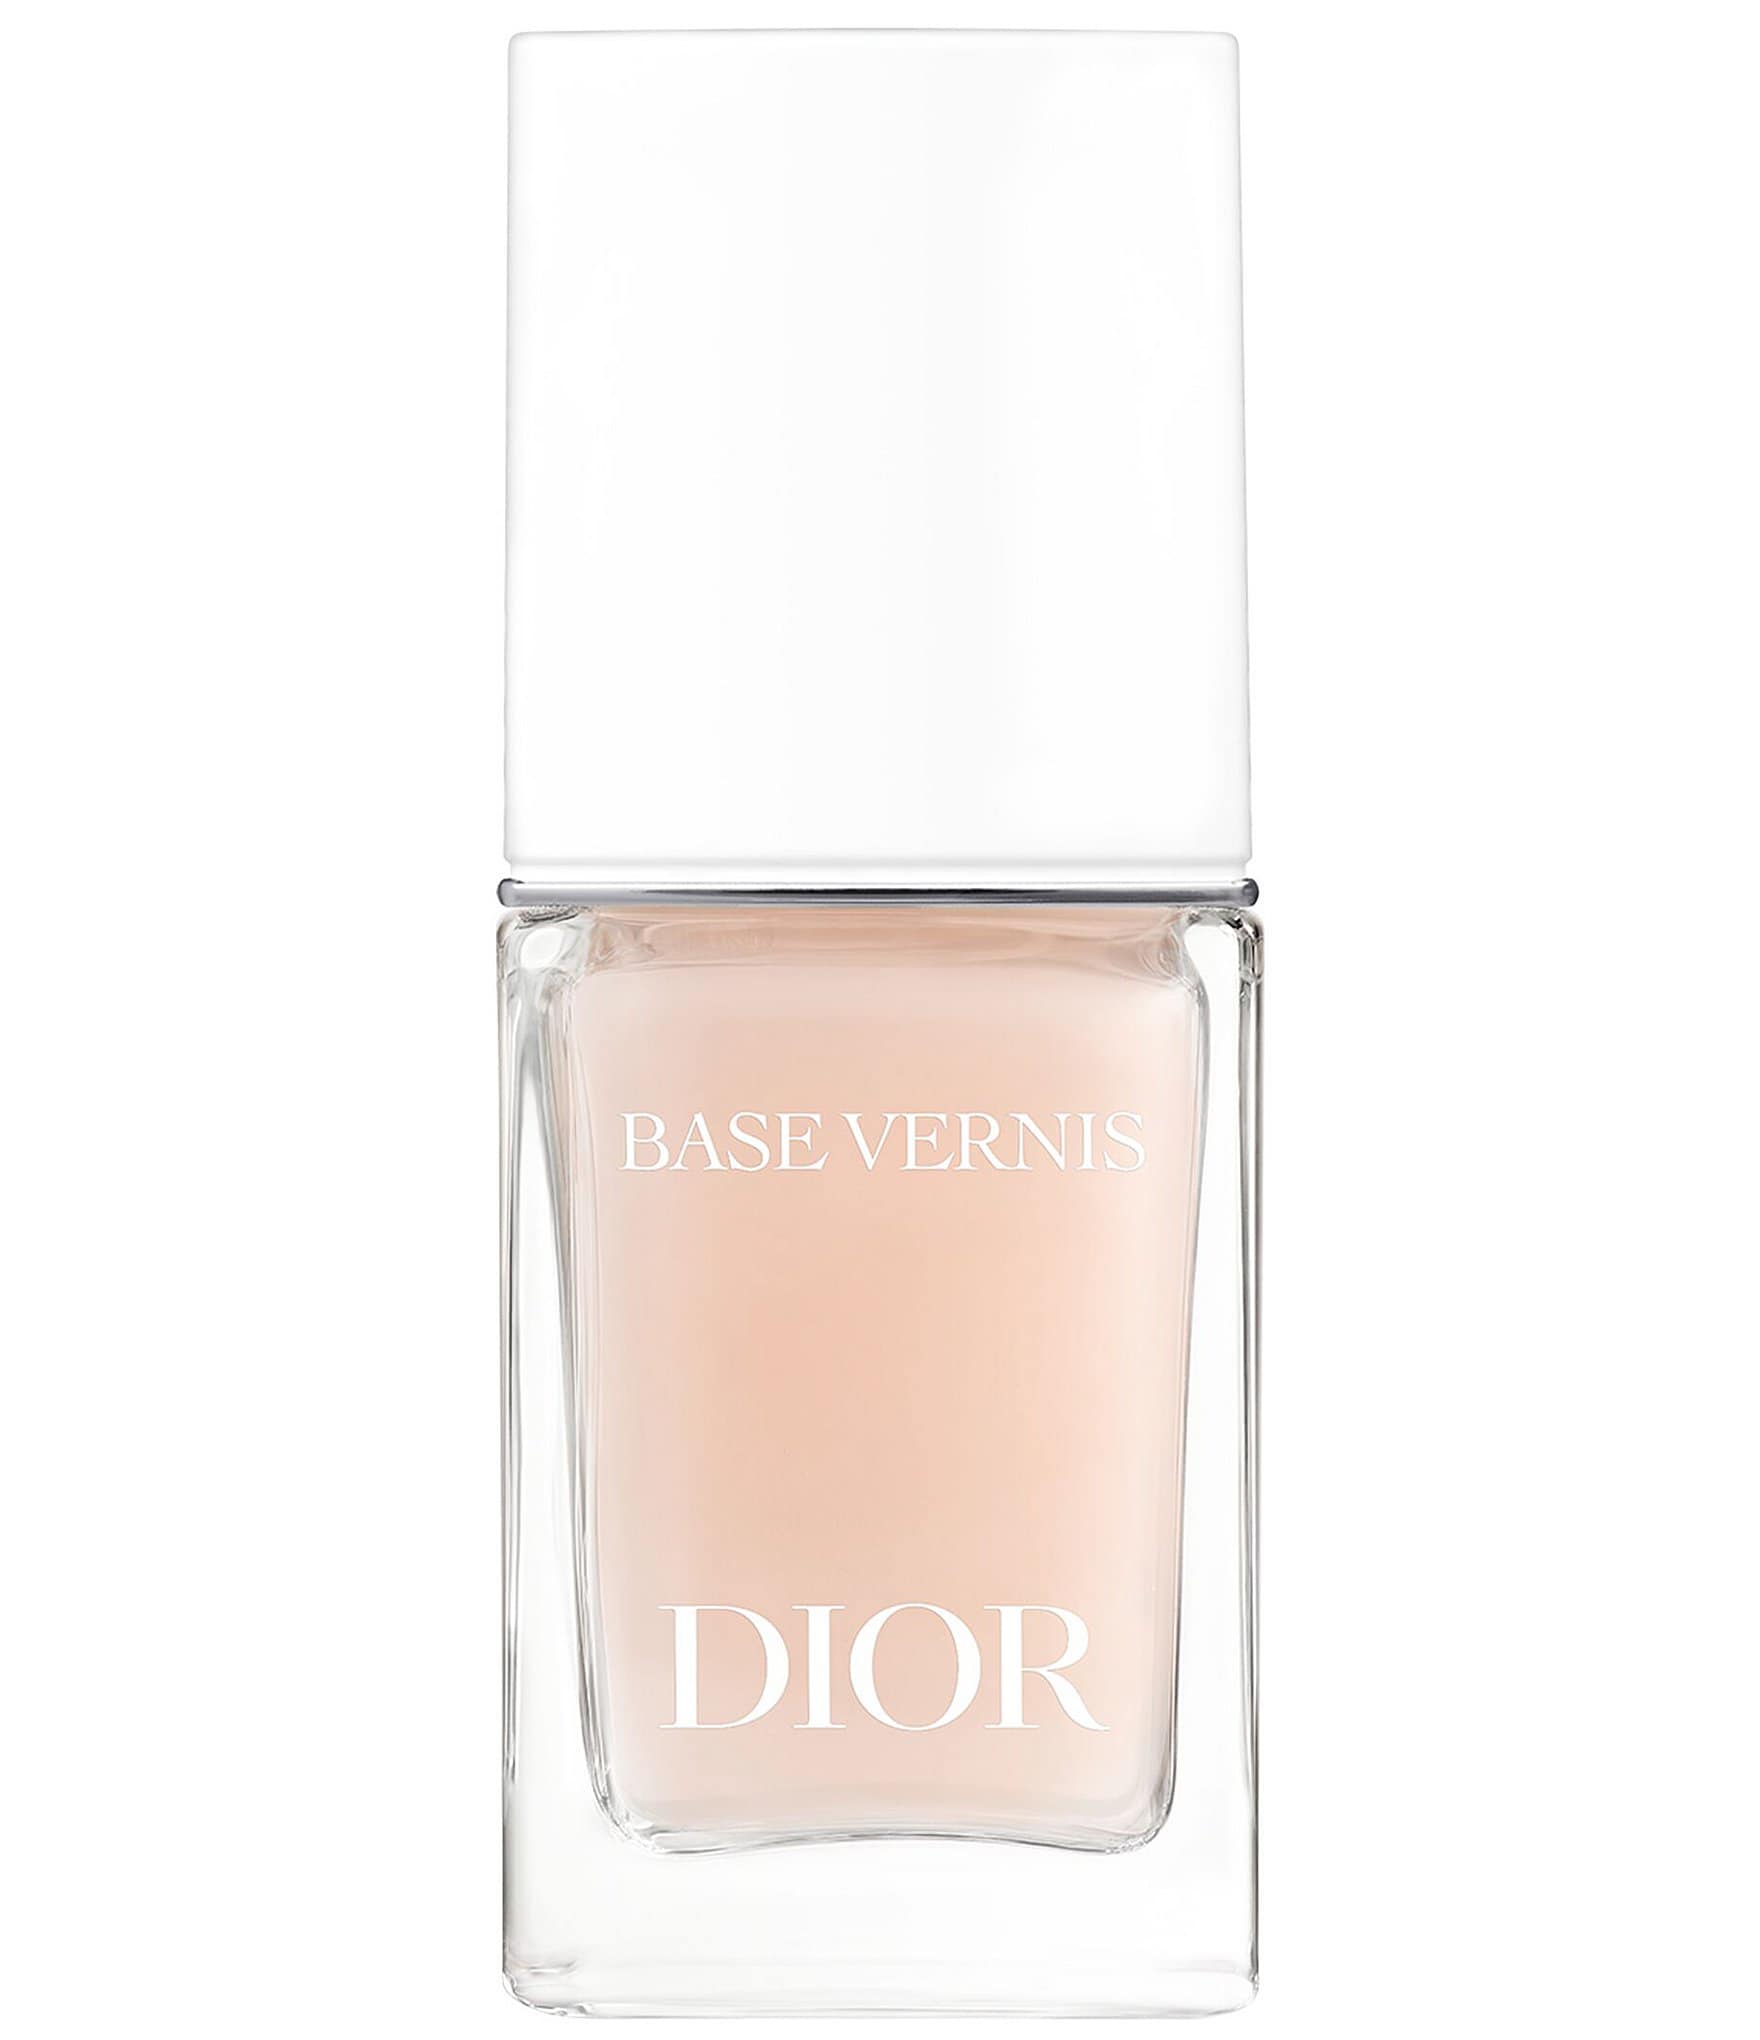 Dior Spring 2014 – Nail polish swatches, Porcelaine and Bouquet – Bubbly  Michelle